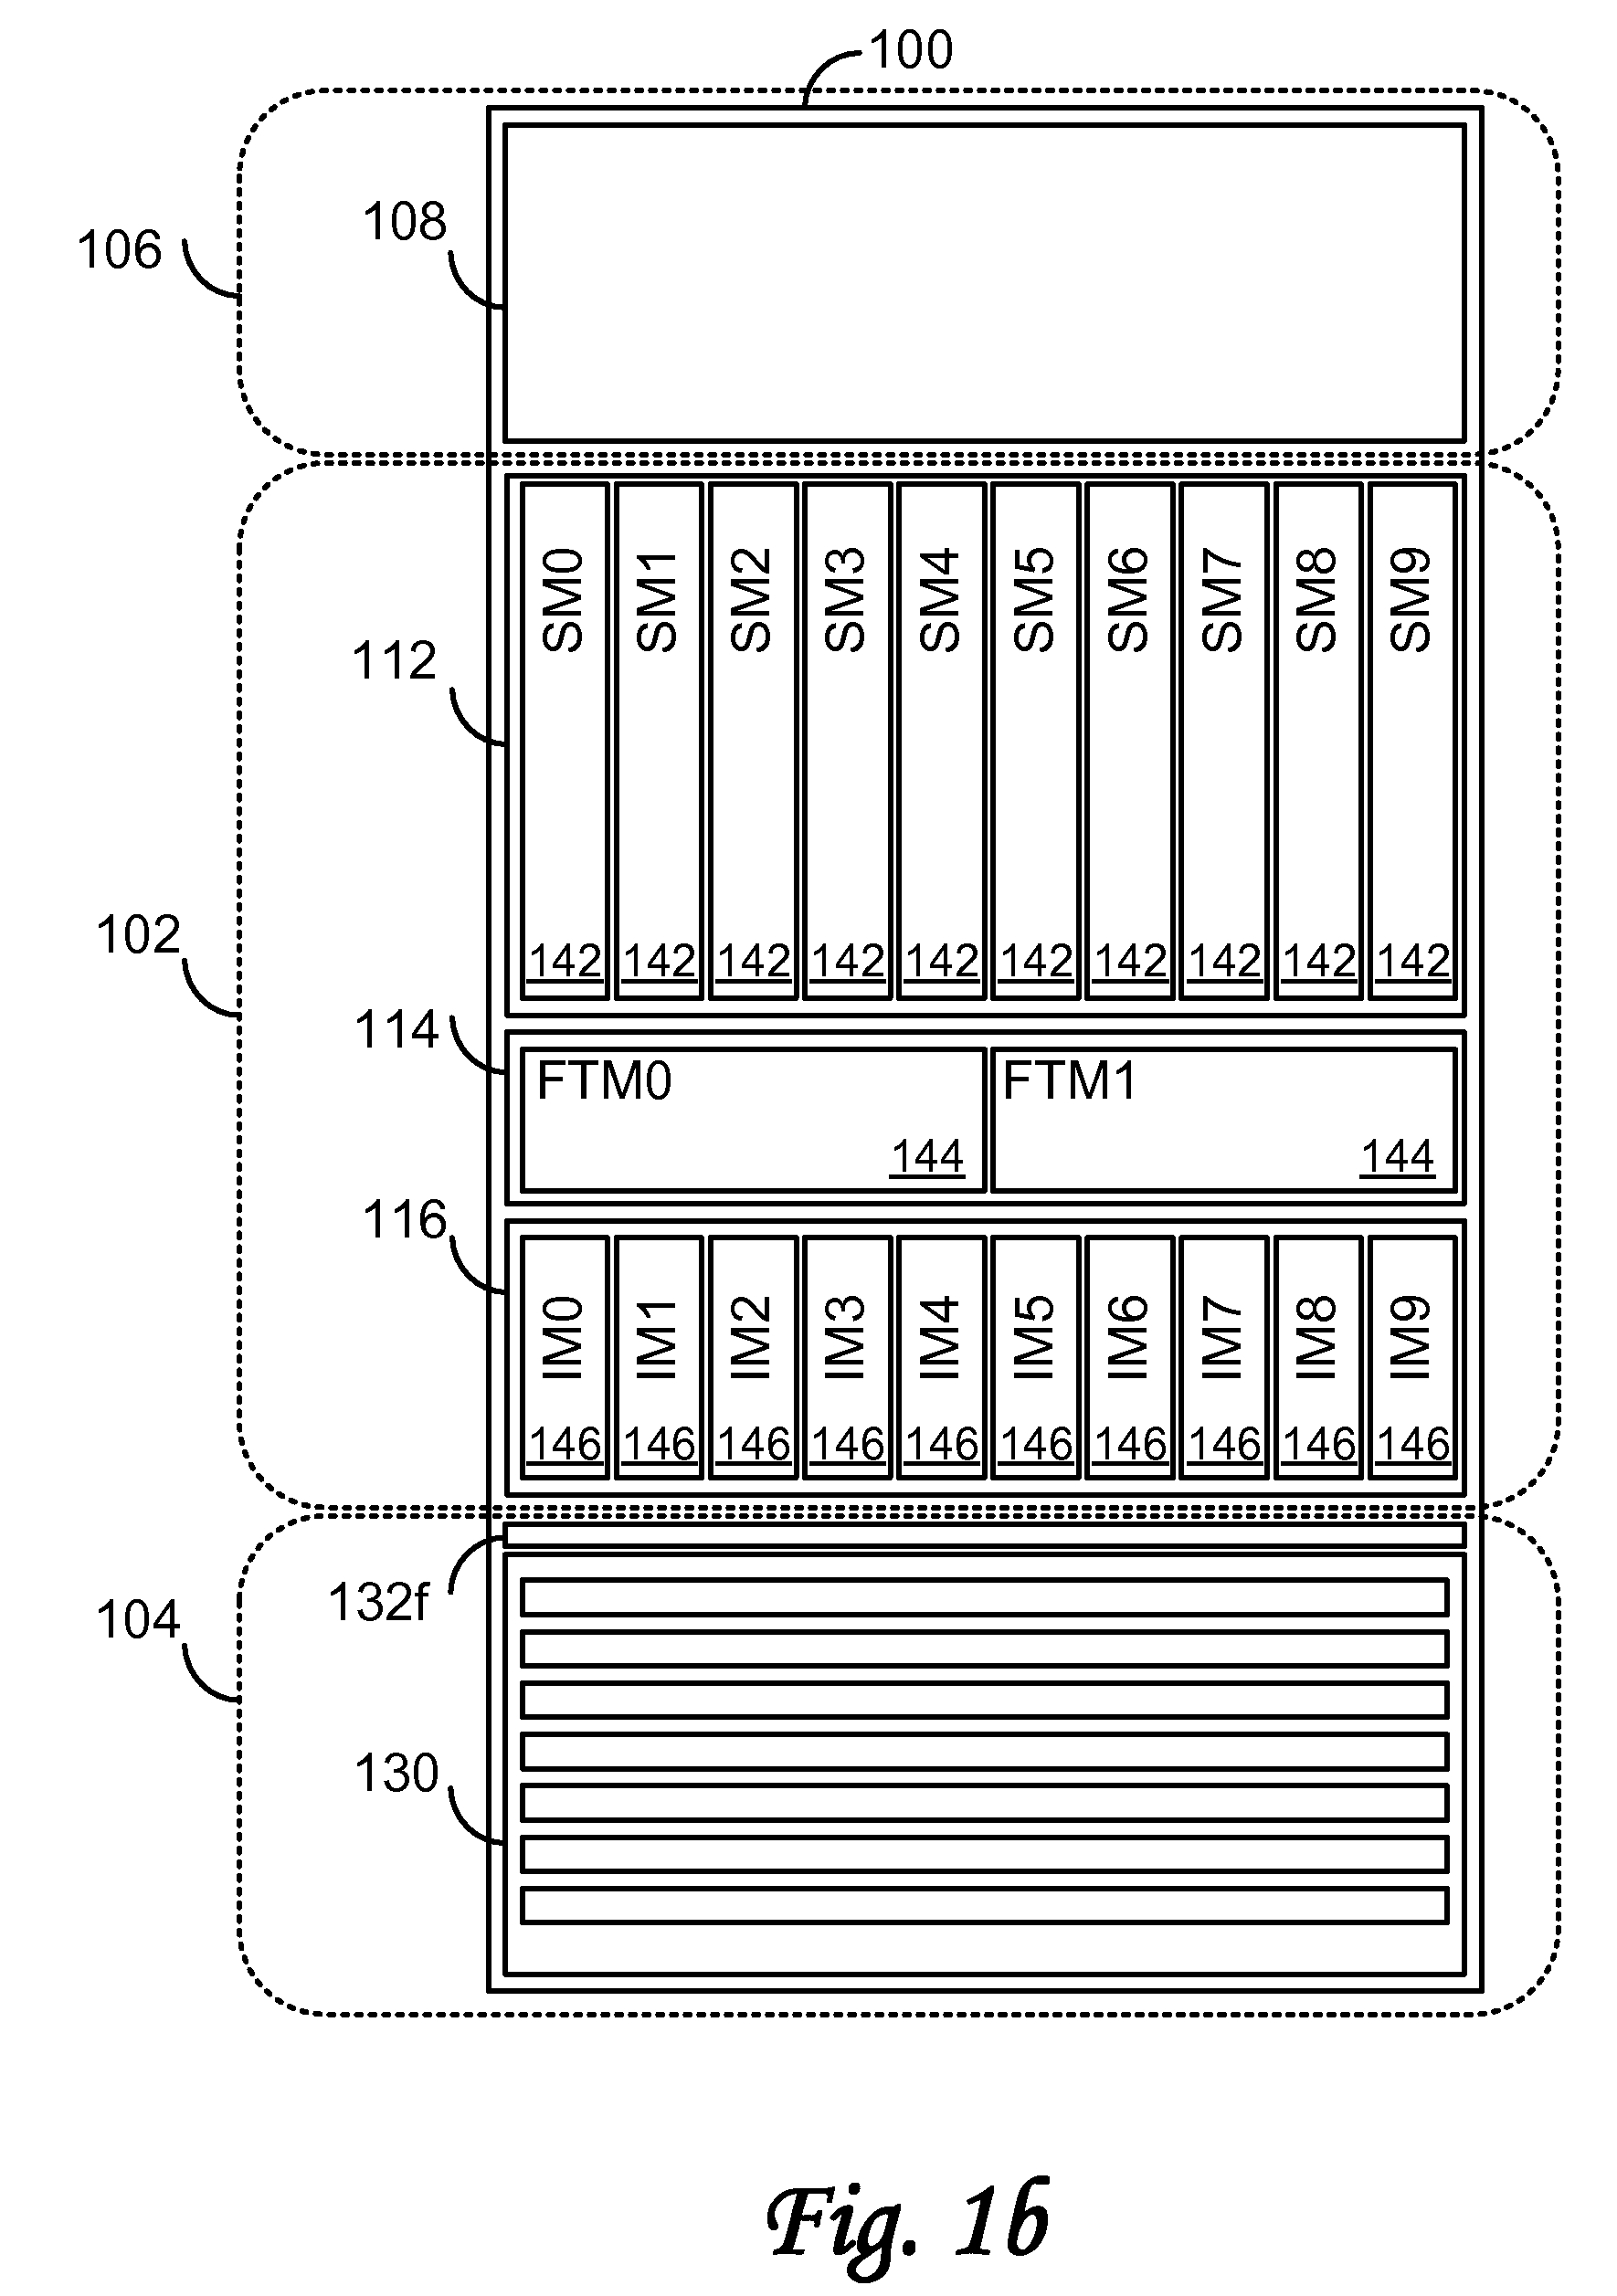 Cooling high performance computer systems